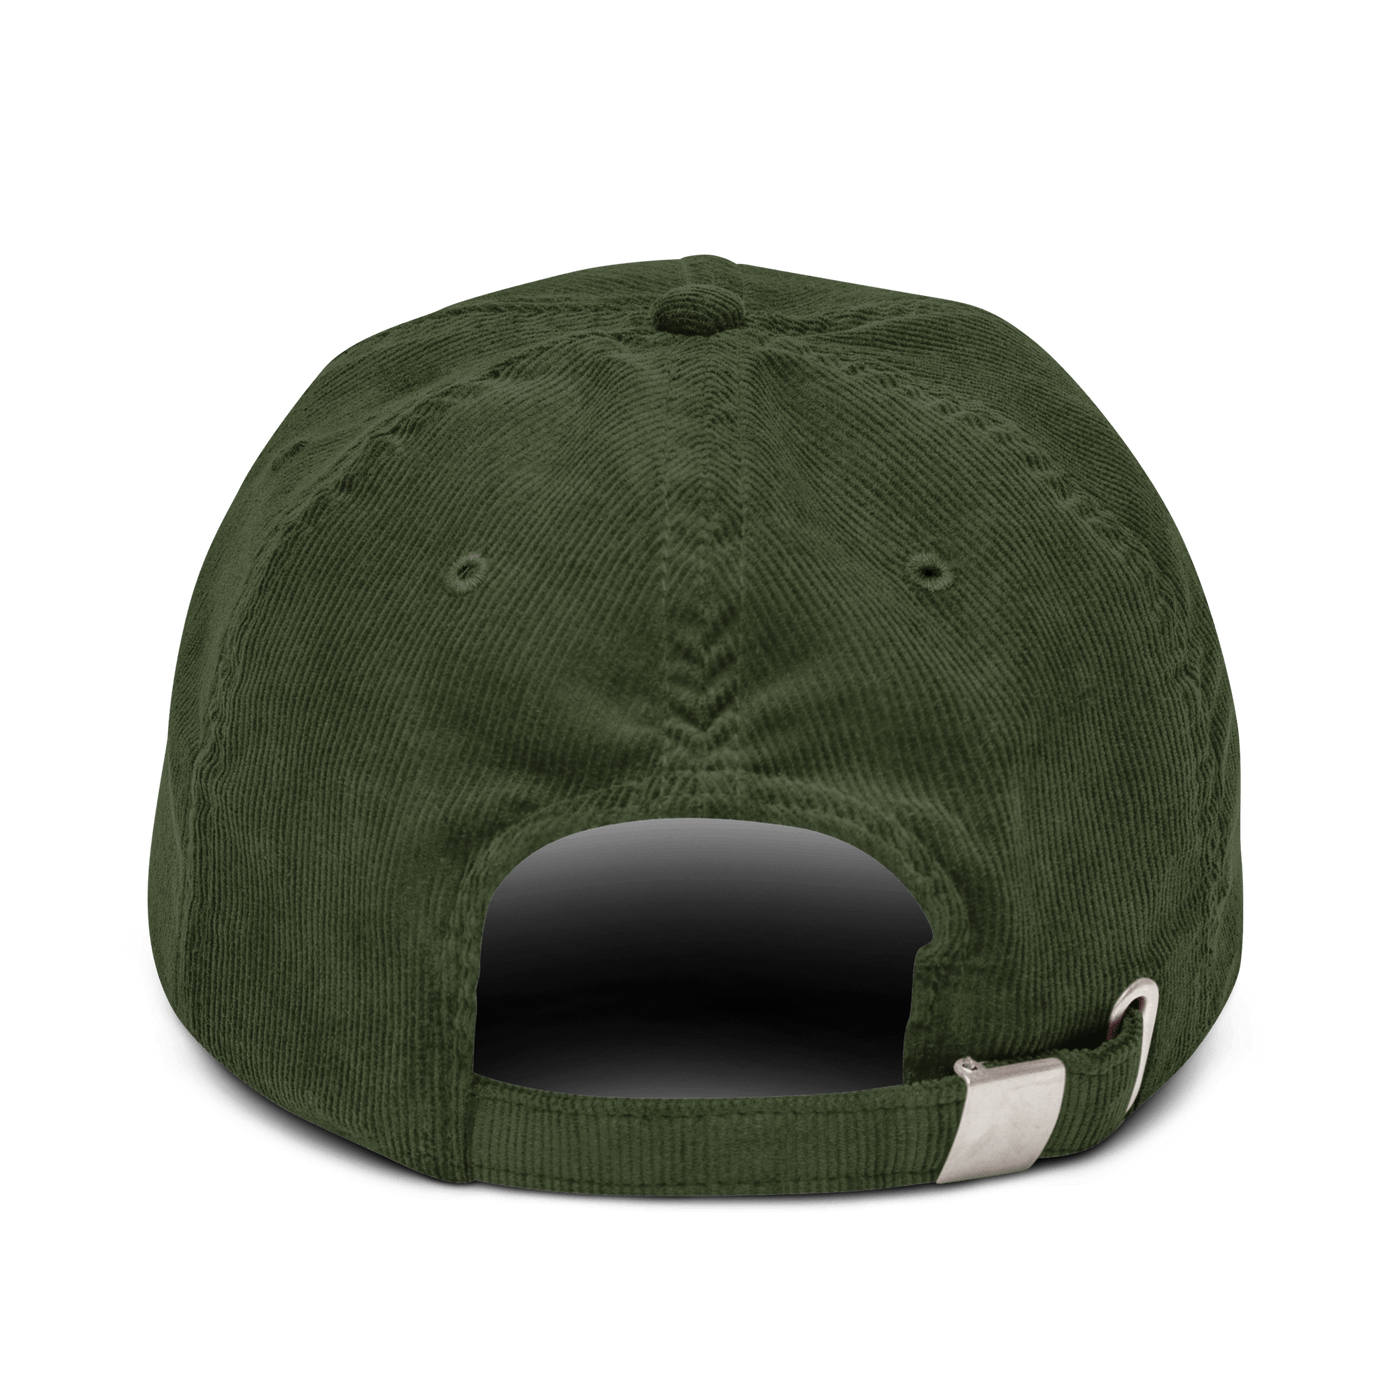 I put coffee in my coffee Corduroy hat - Dark Olive - - Just Another Cap Store